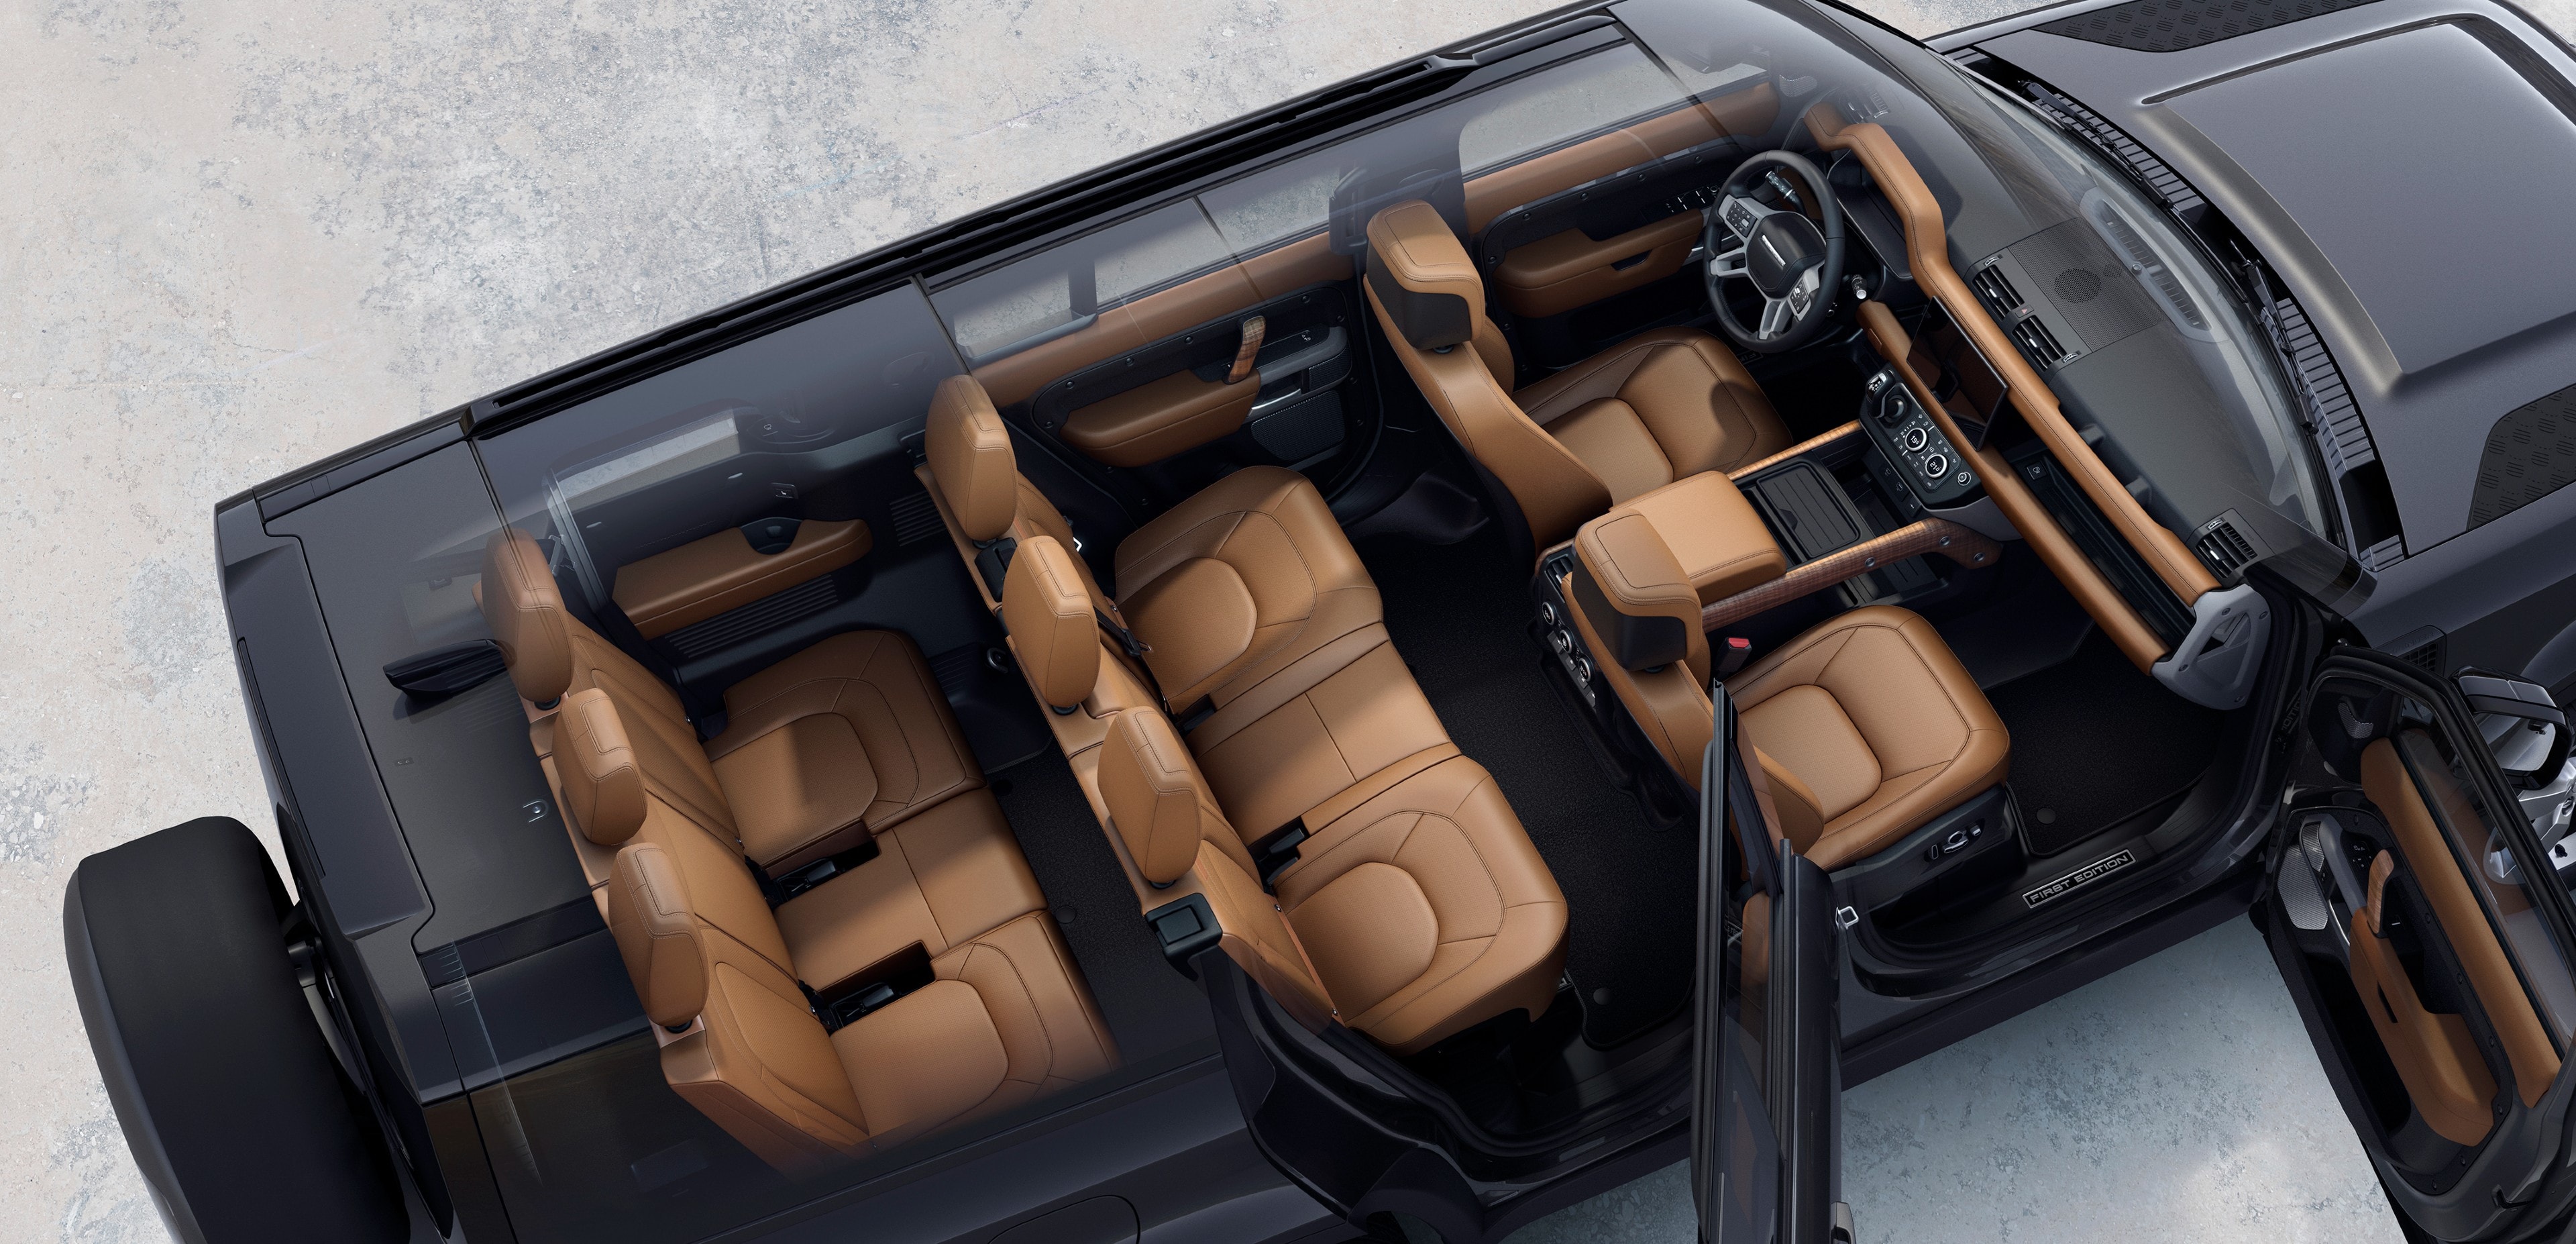 The Land Rover Defender 130 gets stadium-style seats with the second and third row elevated